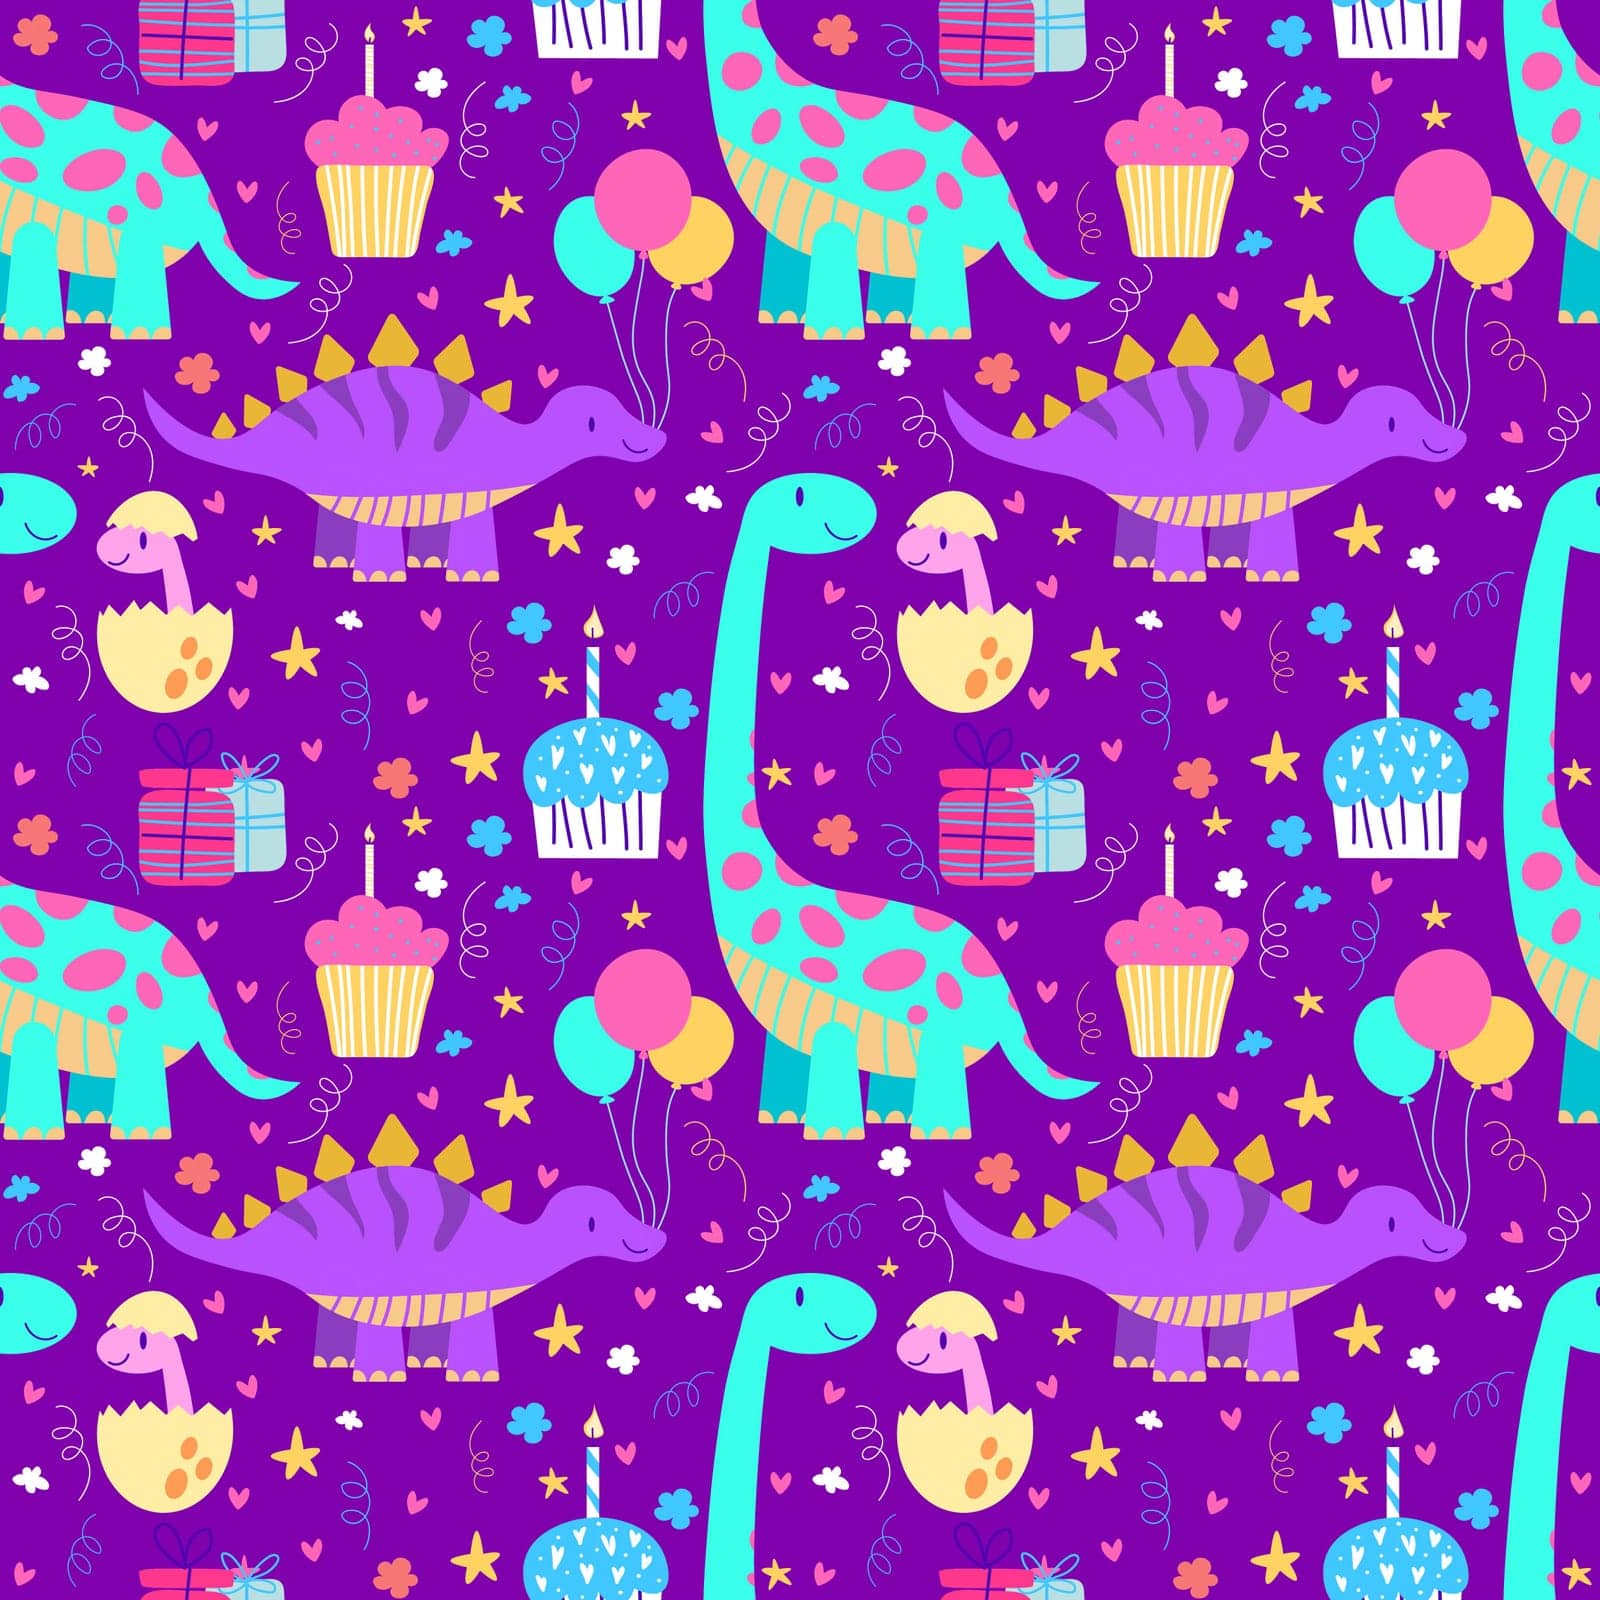 Dinosaur birthday party Dino seamless pattern kid holiday celebration illustration Baby design for birthday invitation or baby shower, poster, clothing, nursery wall art and card. EPS by Alxyzt